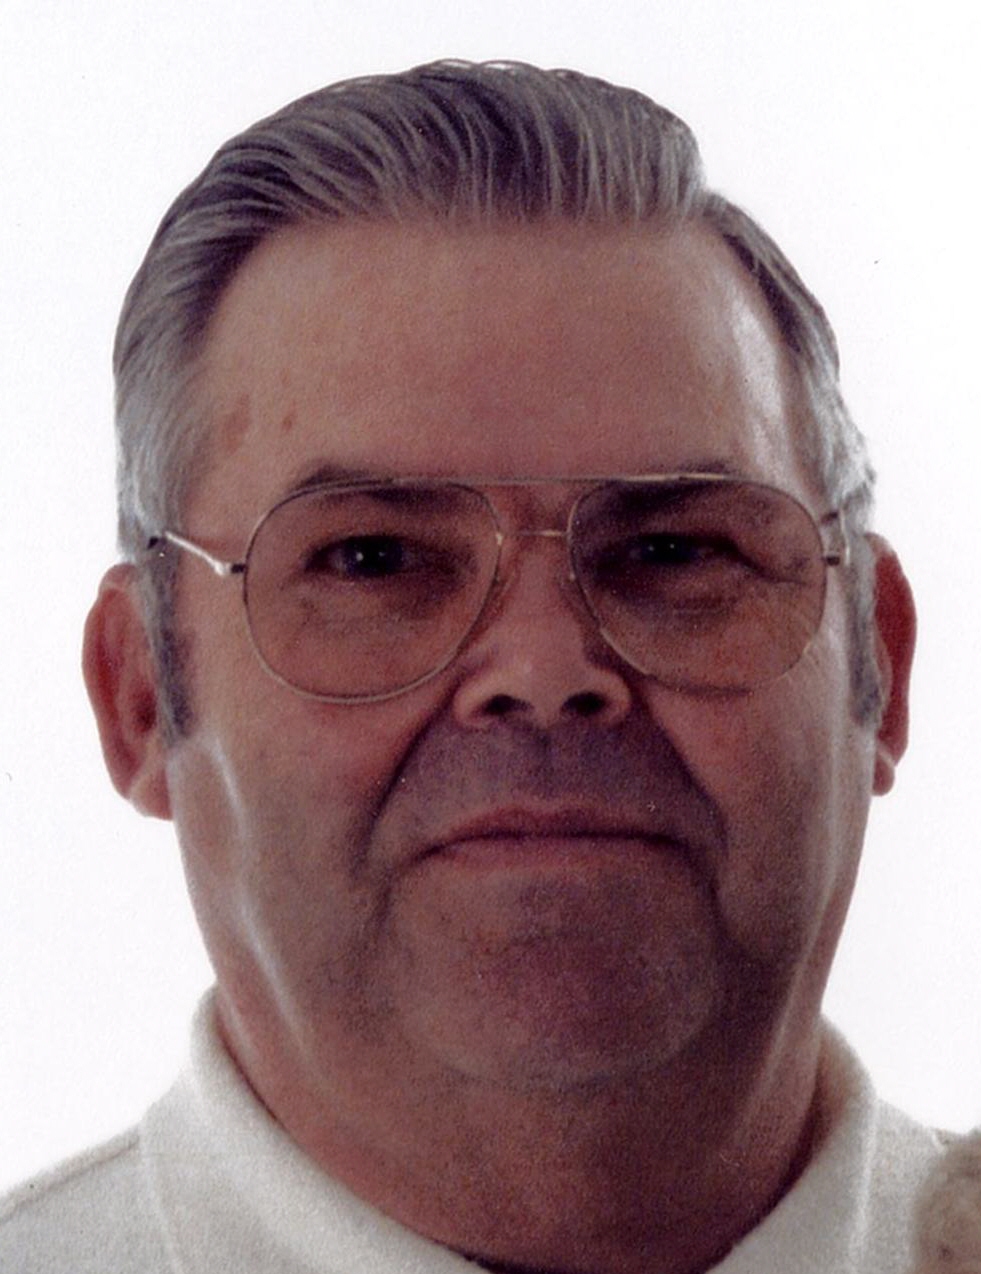 Obituary information for Kenneth Lee Bloodworth